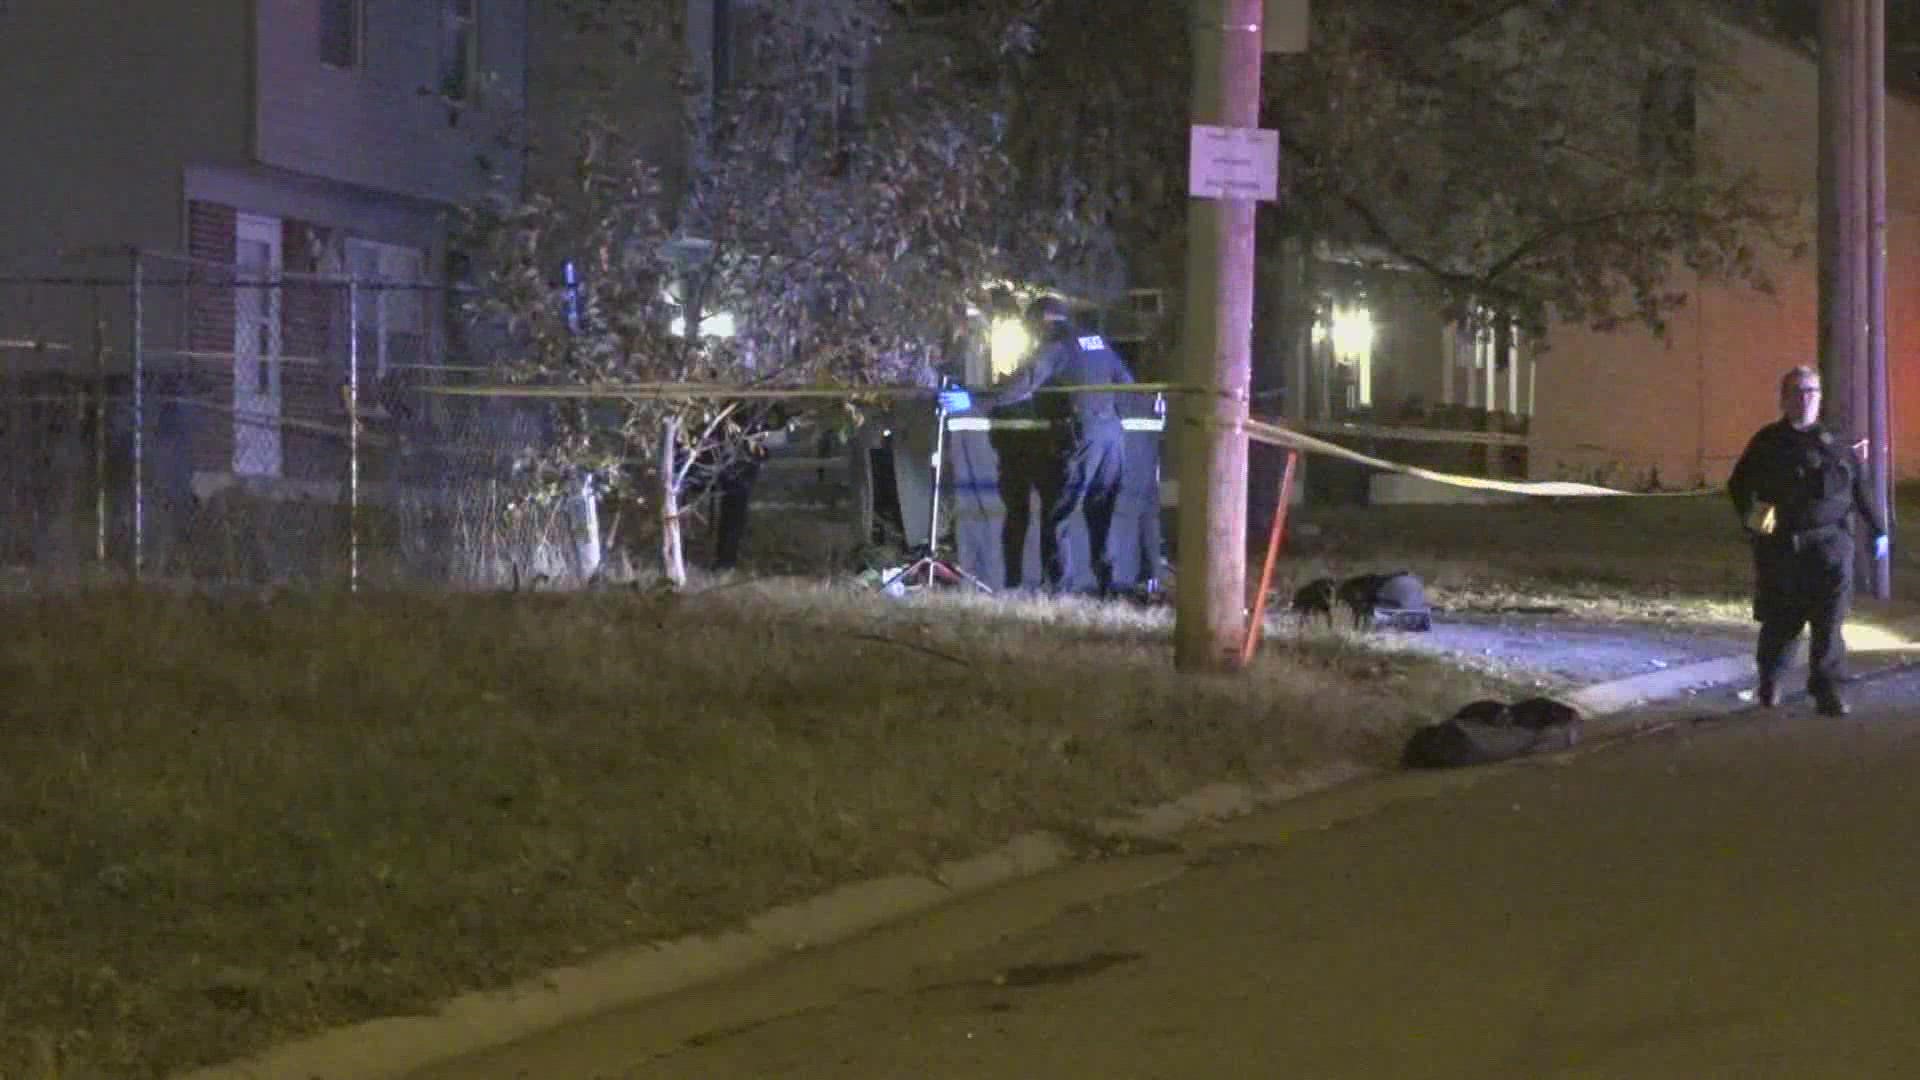 Police said the man was shot in the chest. The shooting happened shortly before midnight on Alaska Avenue.